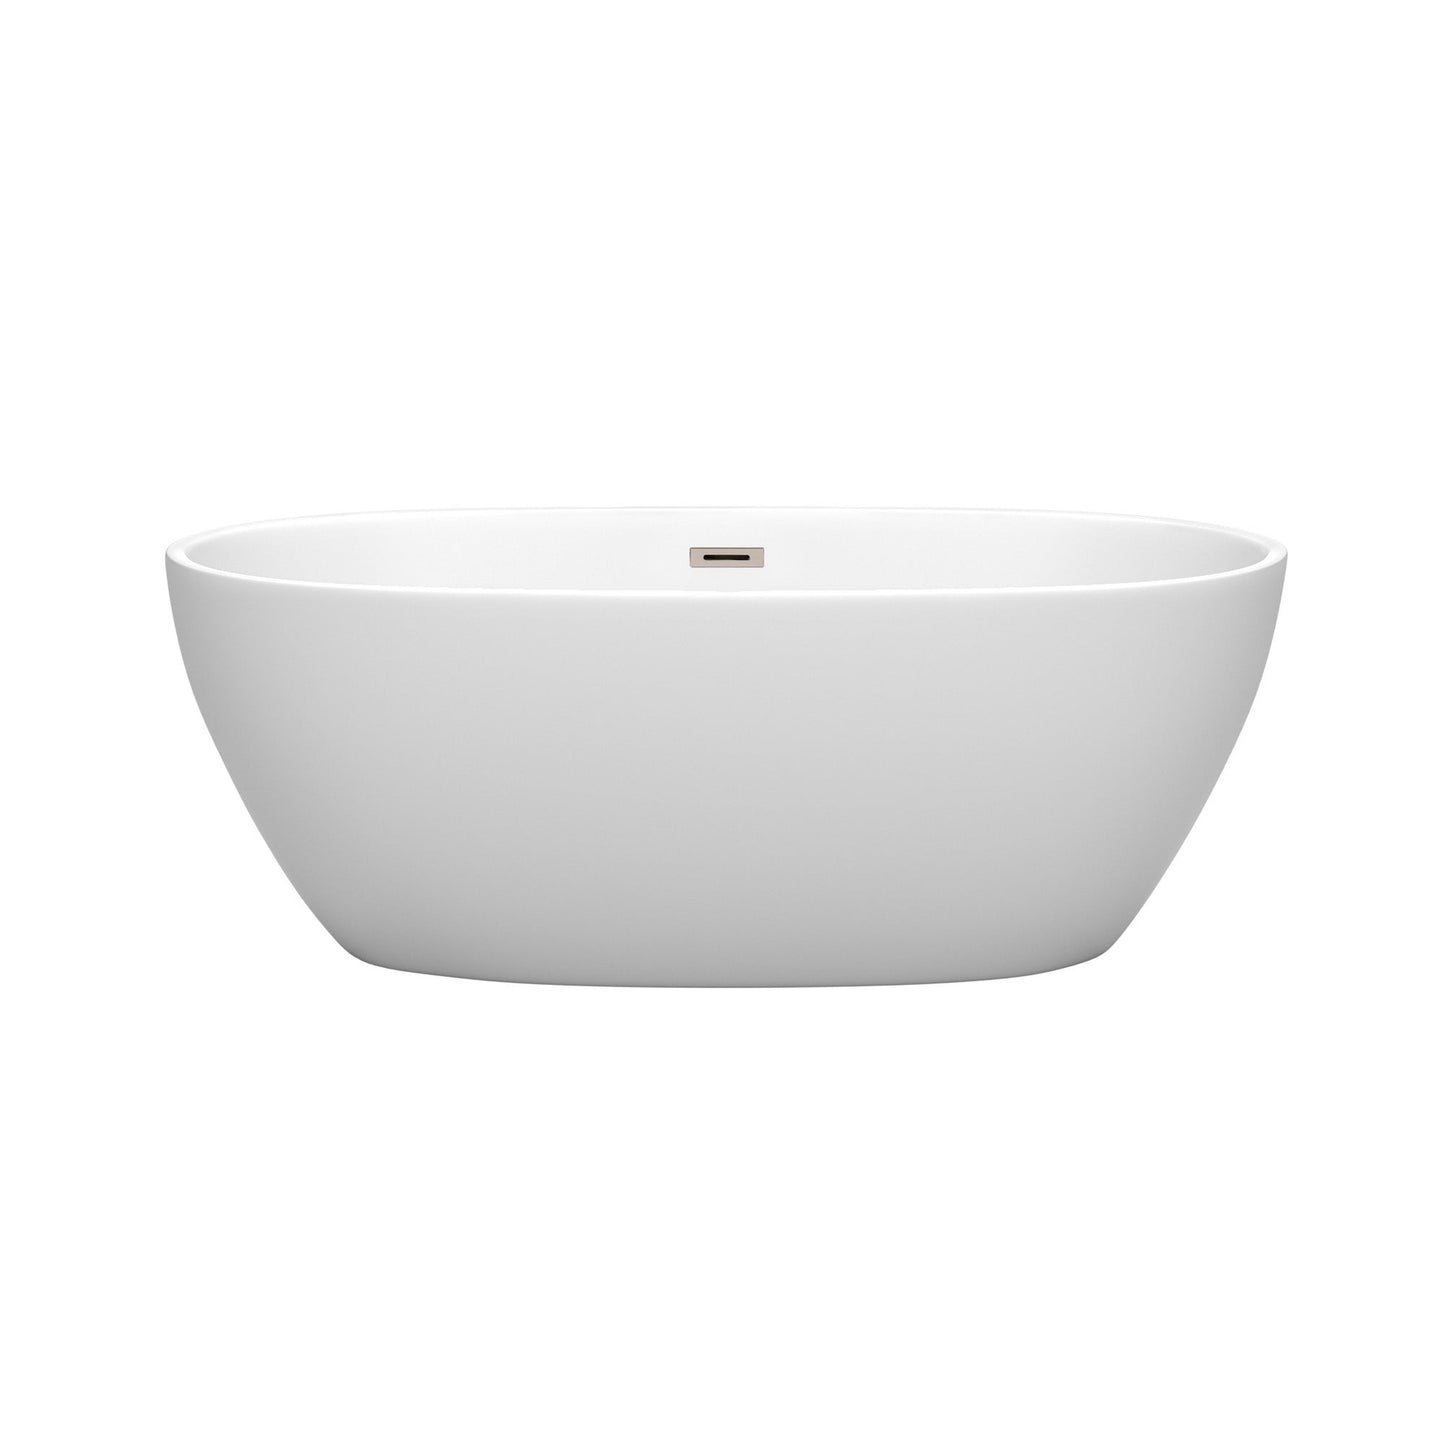 Wyndham Collection Juno 63" Freestanding Bathtub in Matte White With Brushed Nickel Drain and Overflow Trim